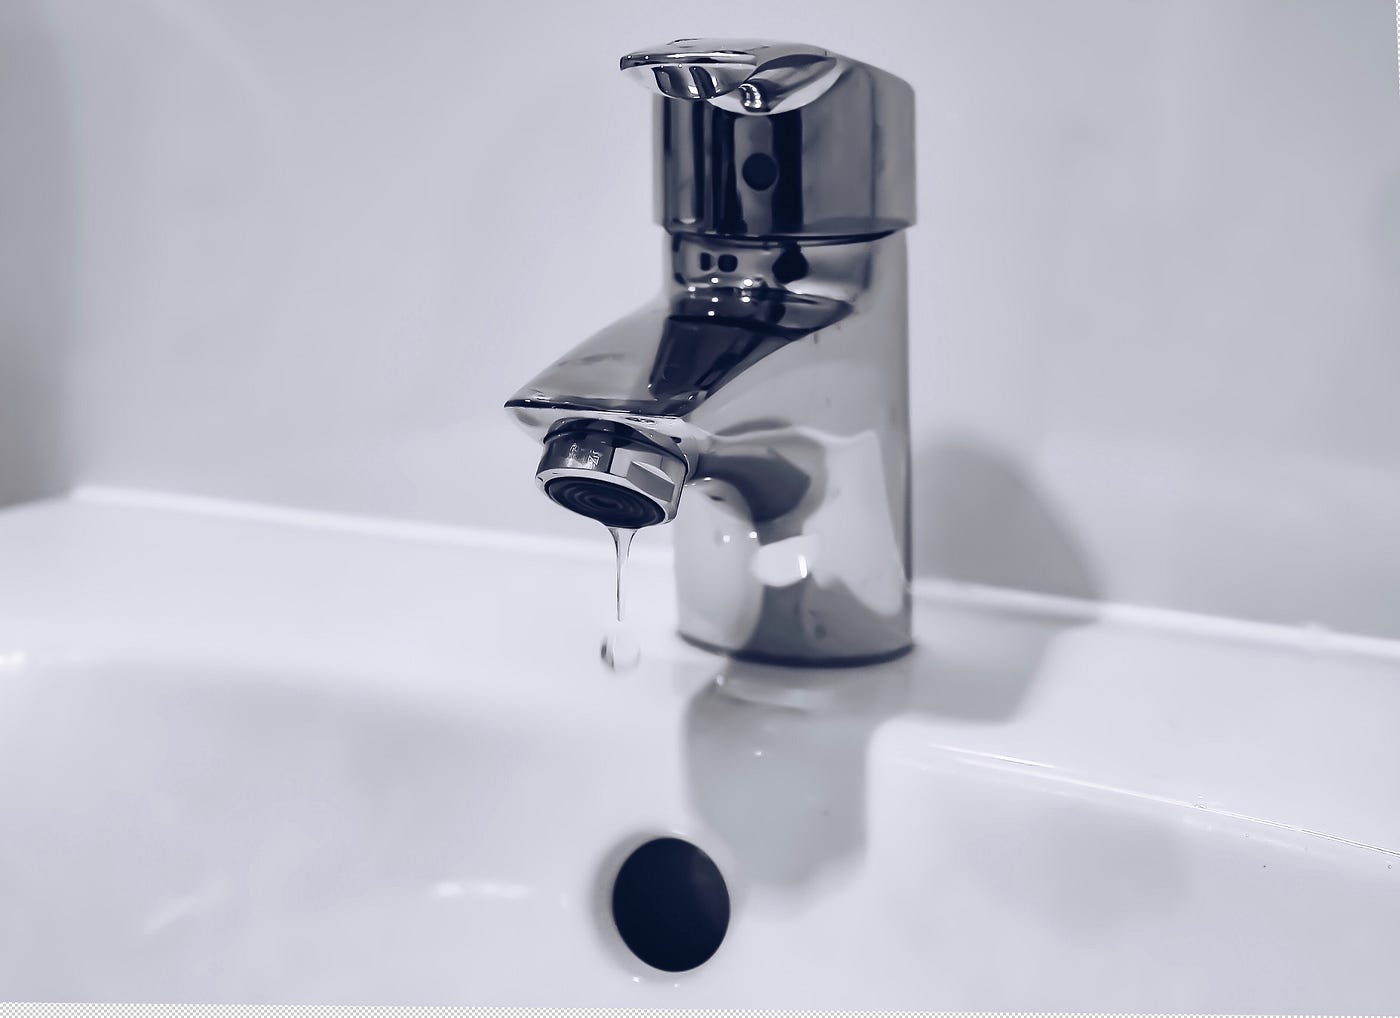 A Dripping Tap. A short story about loneliness | by Isobel Thomas | Medium